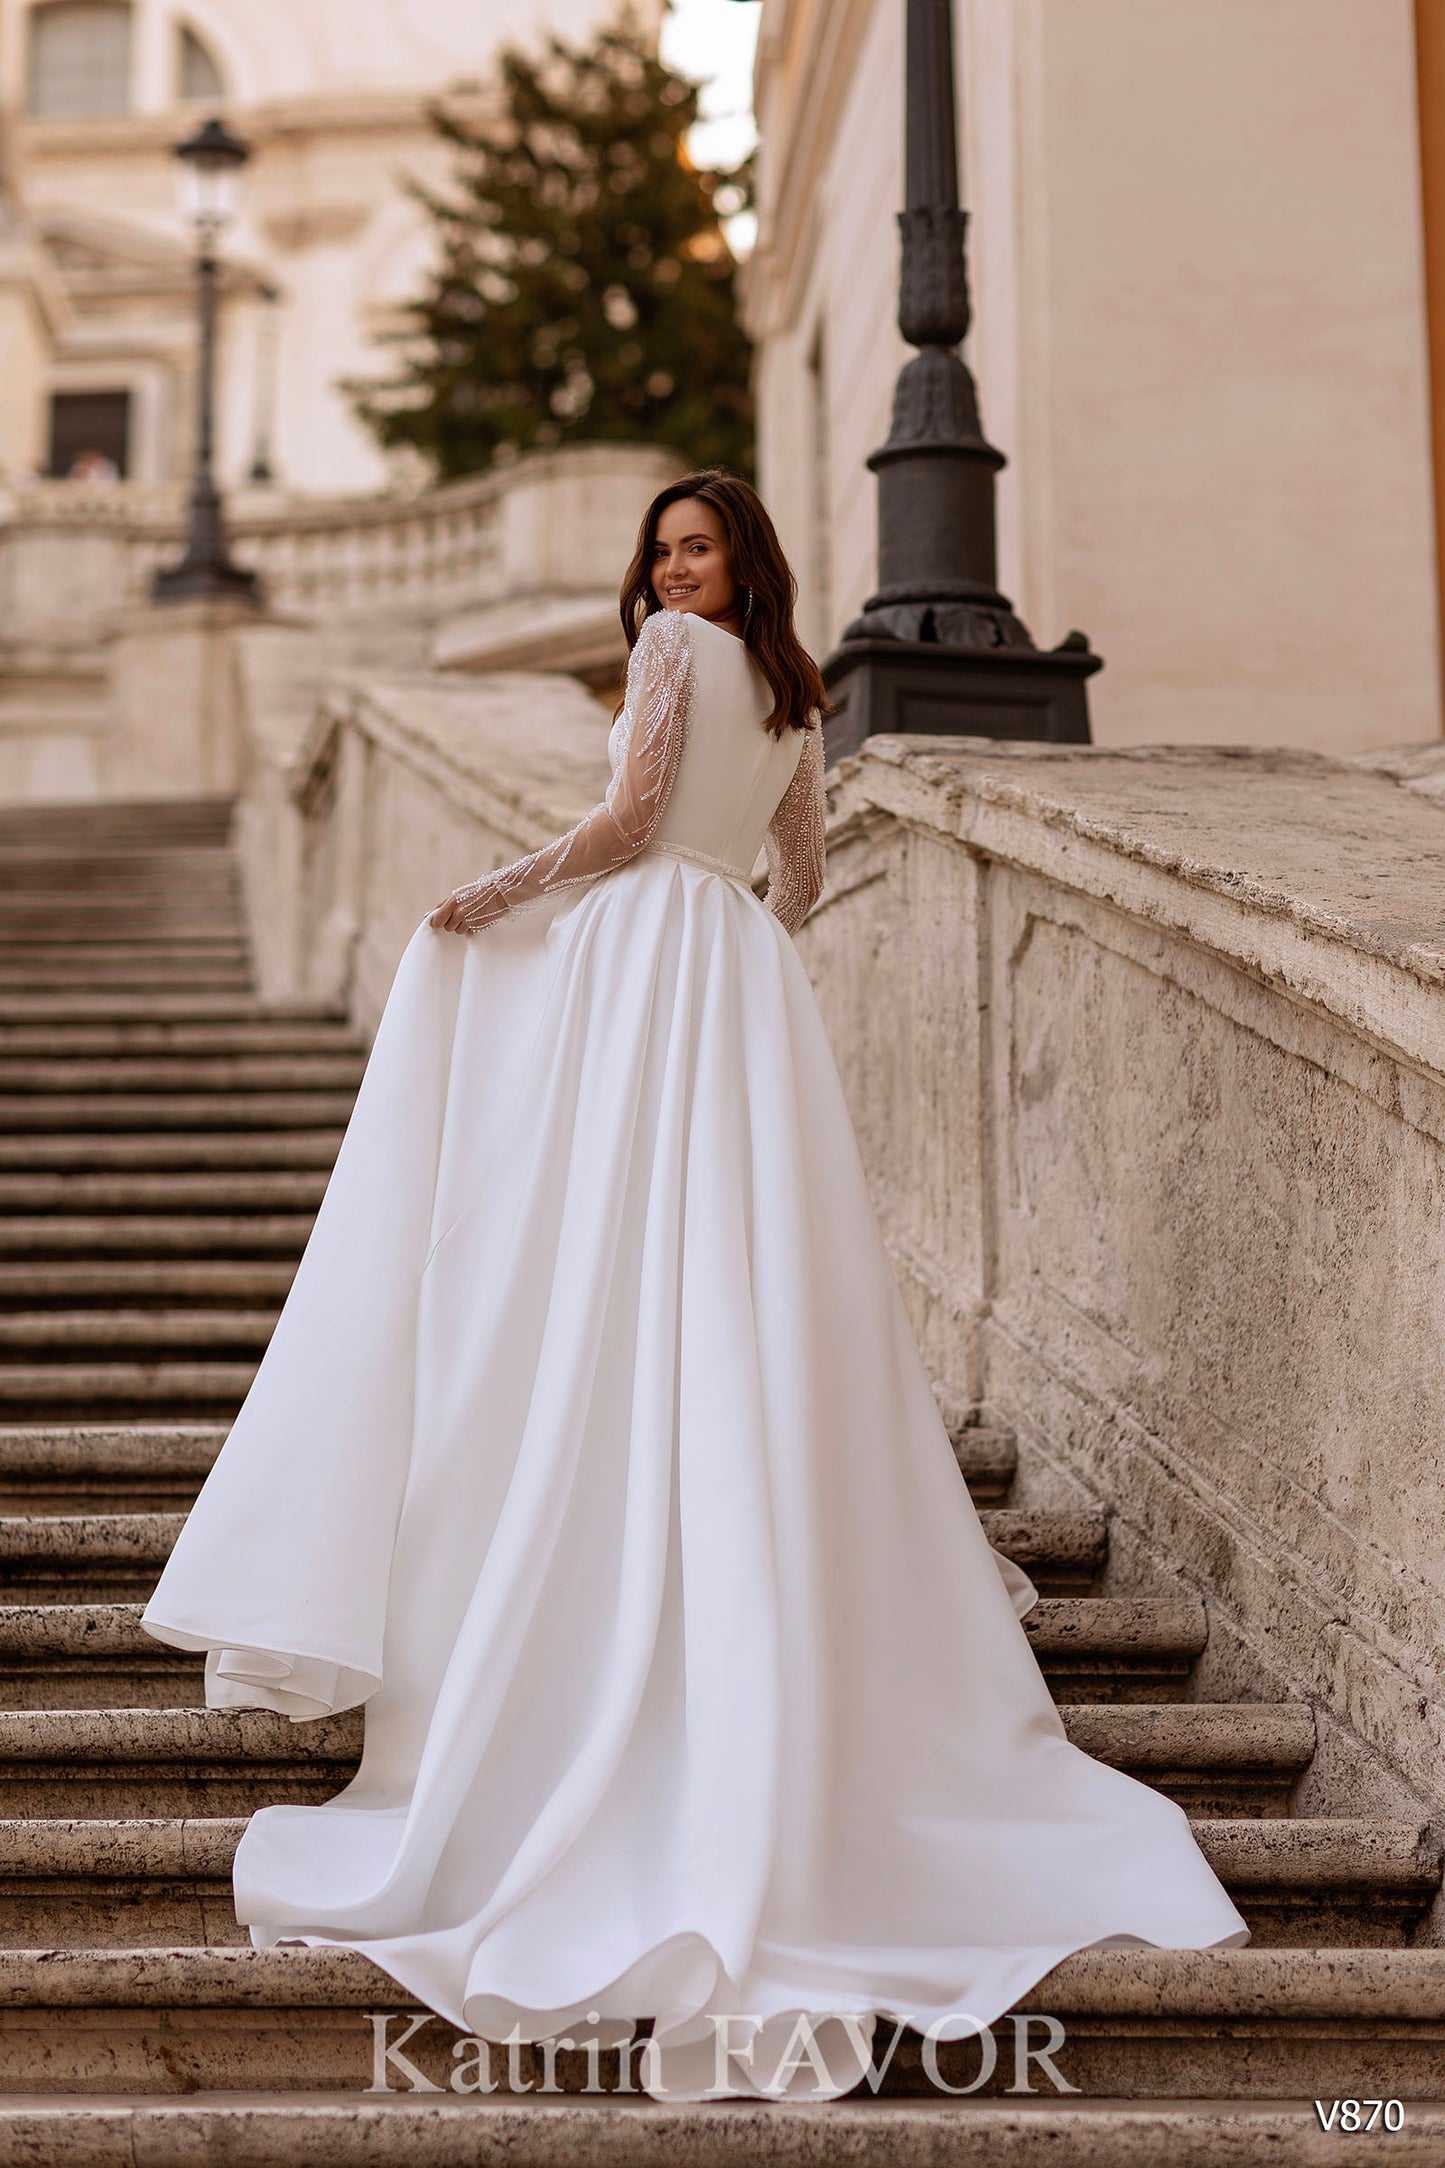 KatrinFAVORboutique-Wedding dress with sheer sleeves satin a line wedding gown